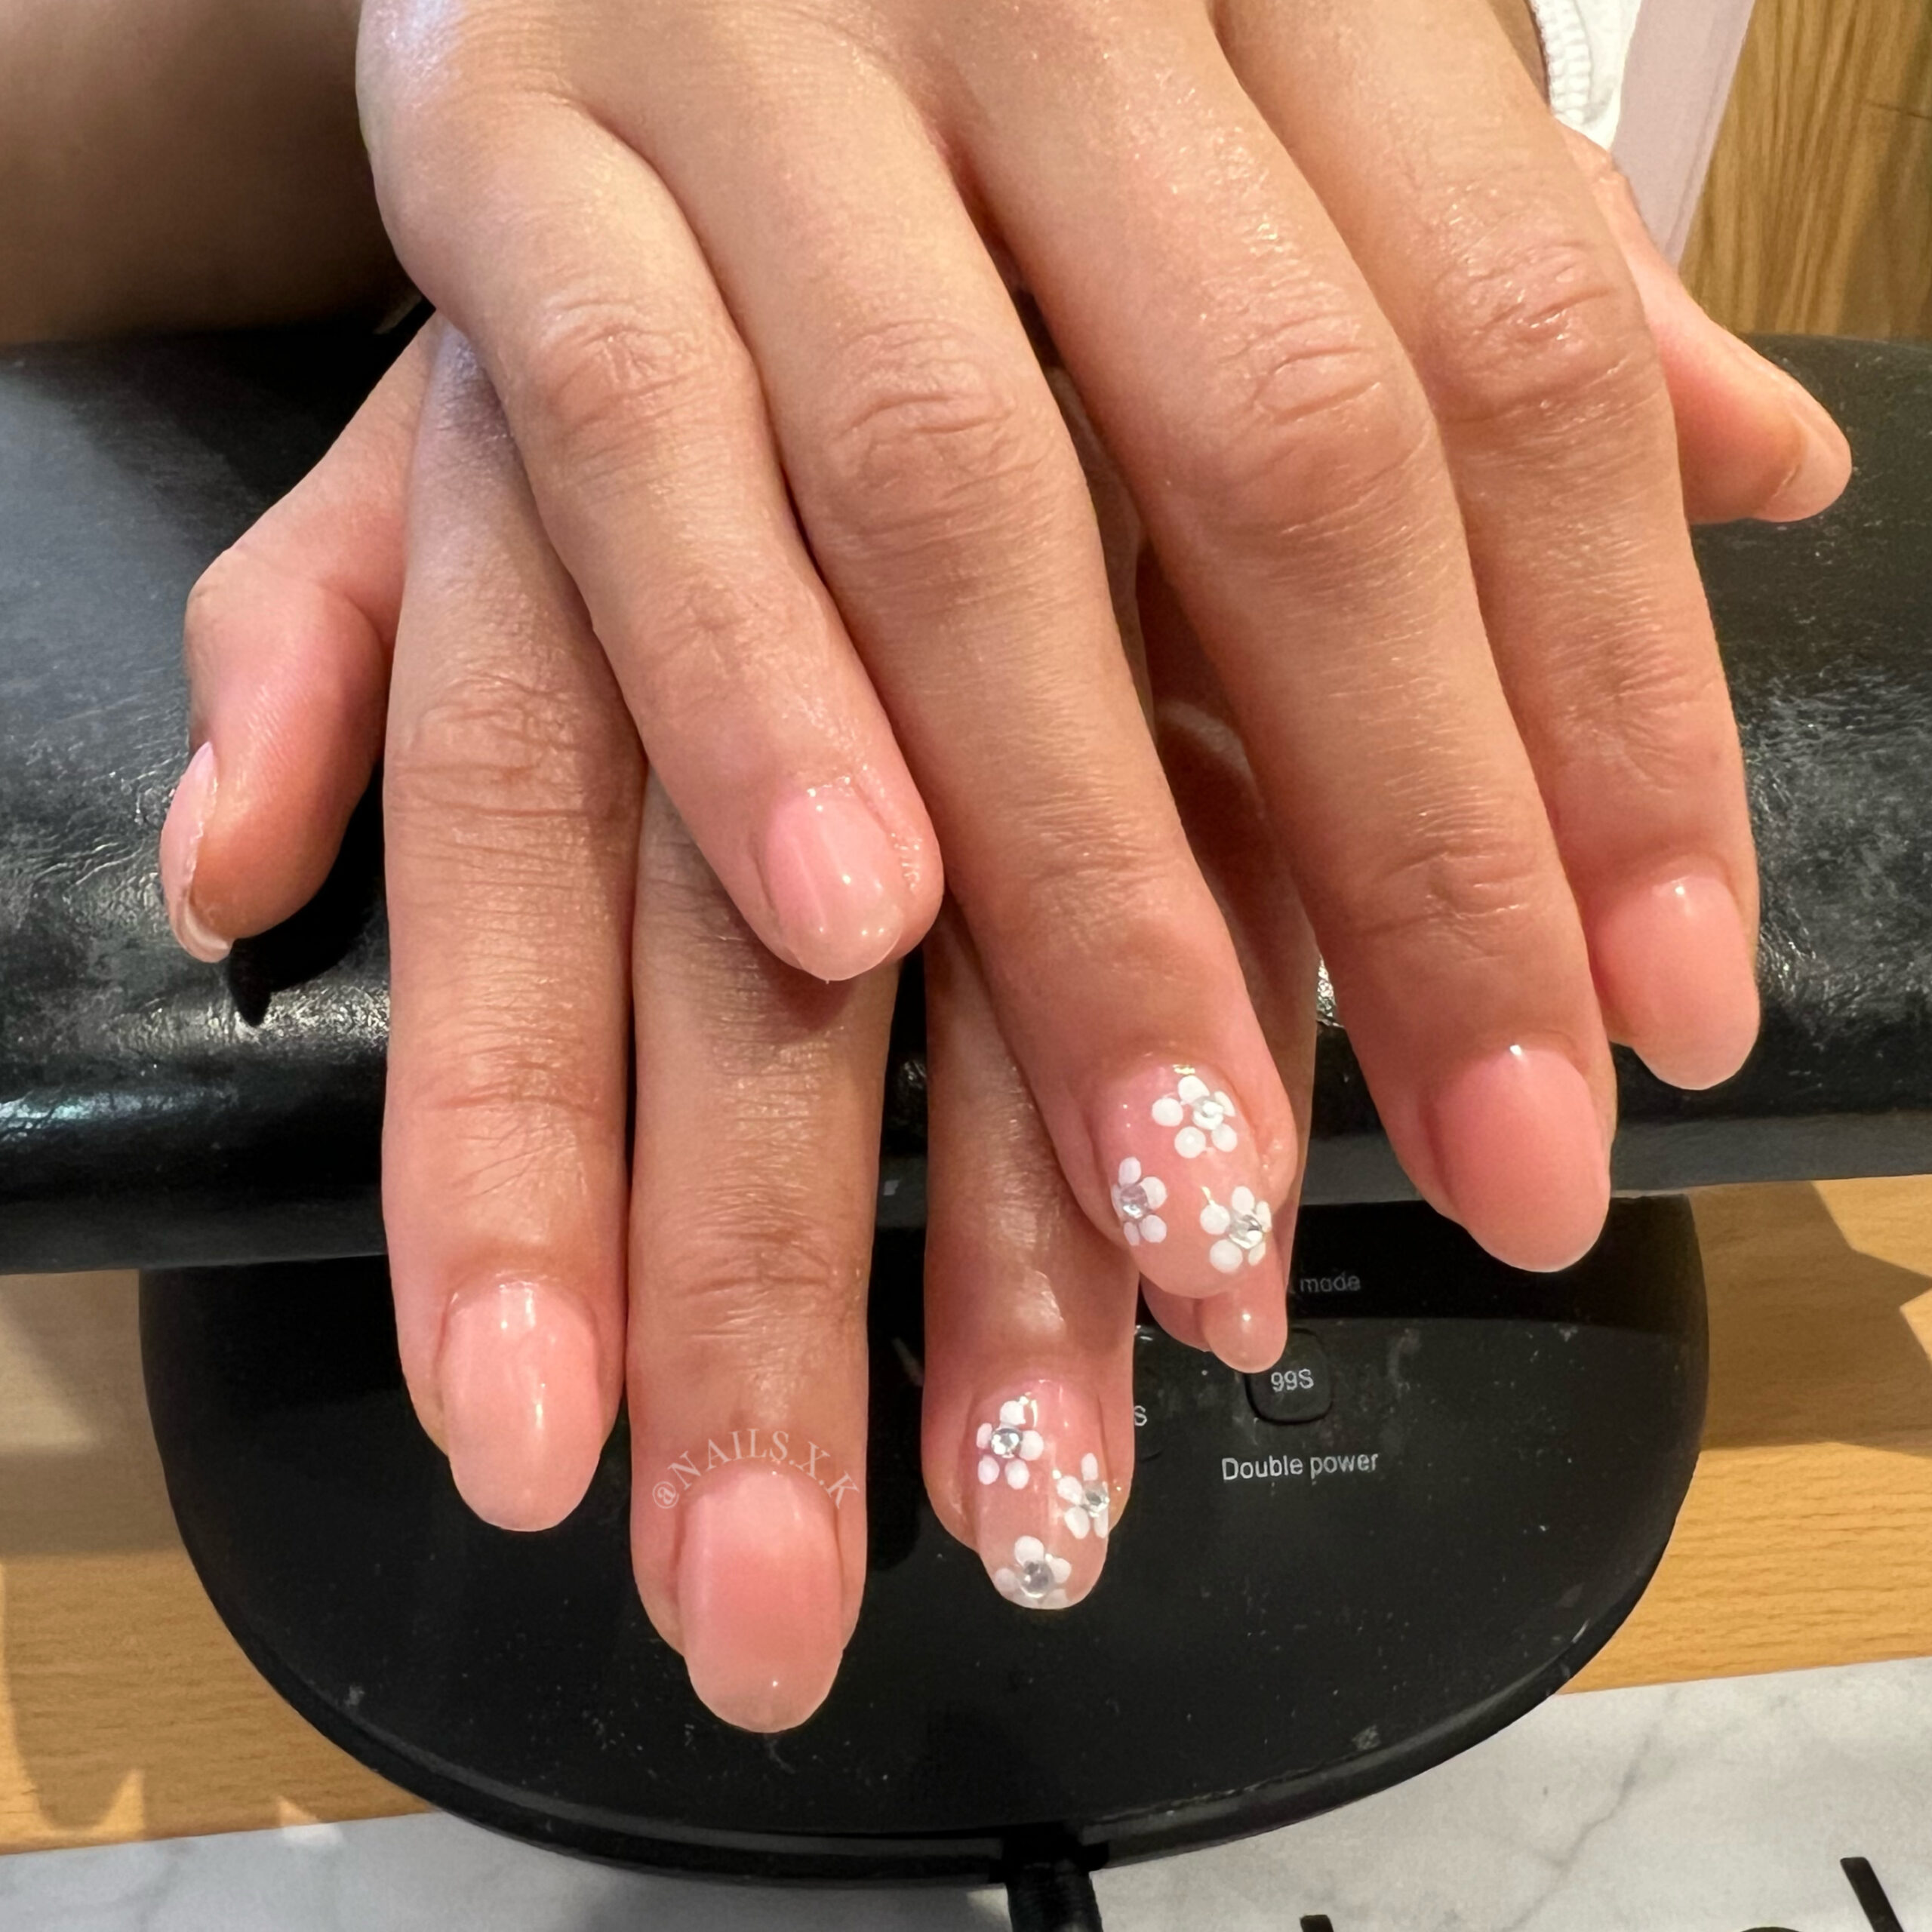 Hard gel set with a pink/nude color and floral designs with rhinestone accents. Nails by K